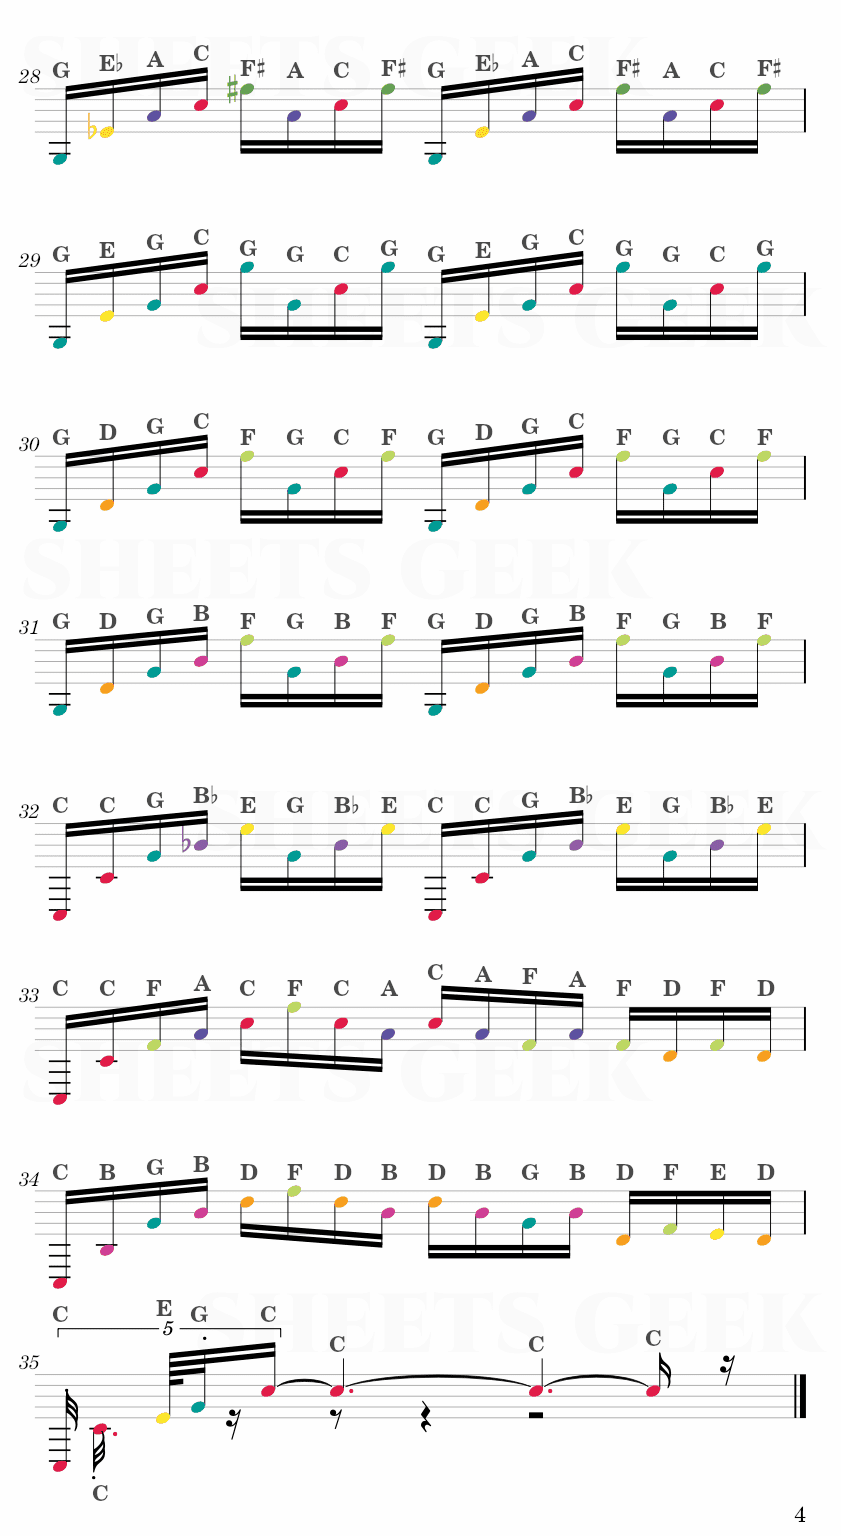 Prelude And Fugue In C Major - Bach Easy Sheet Music Free for piano, keyboard, flute, violin, sax, cello page 4